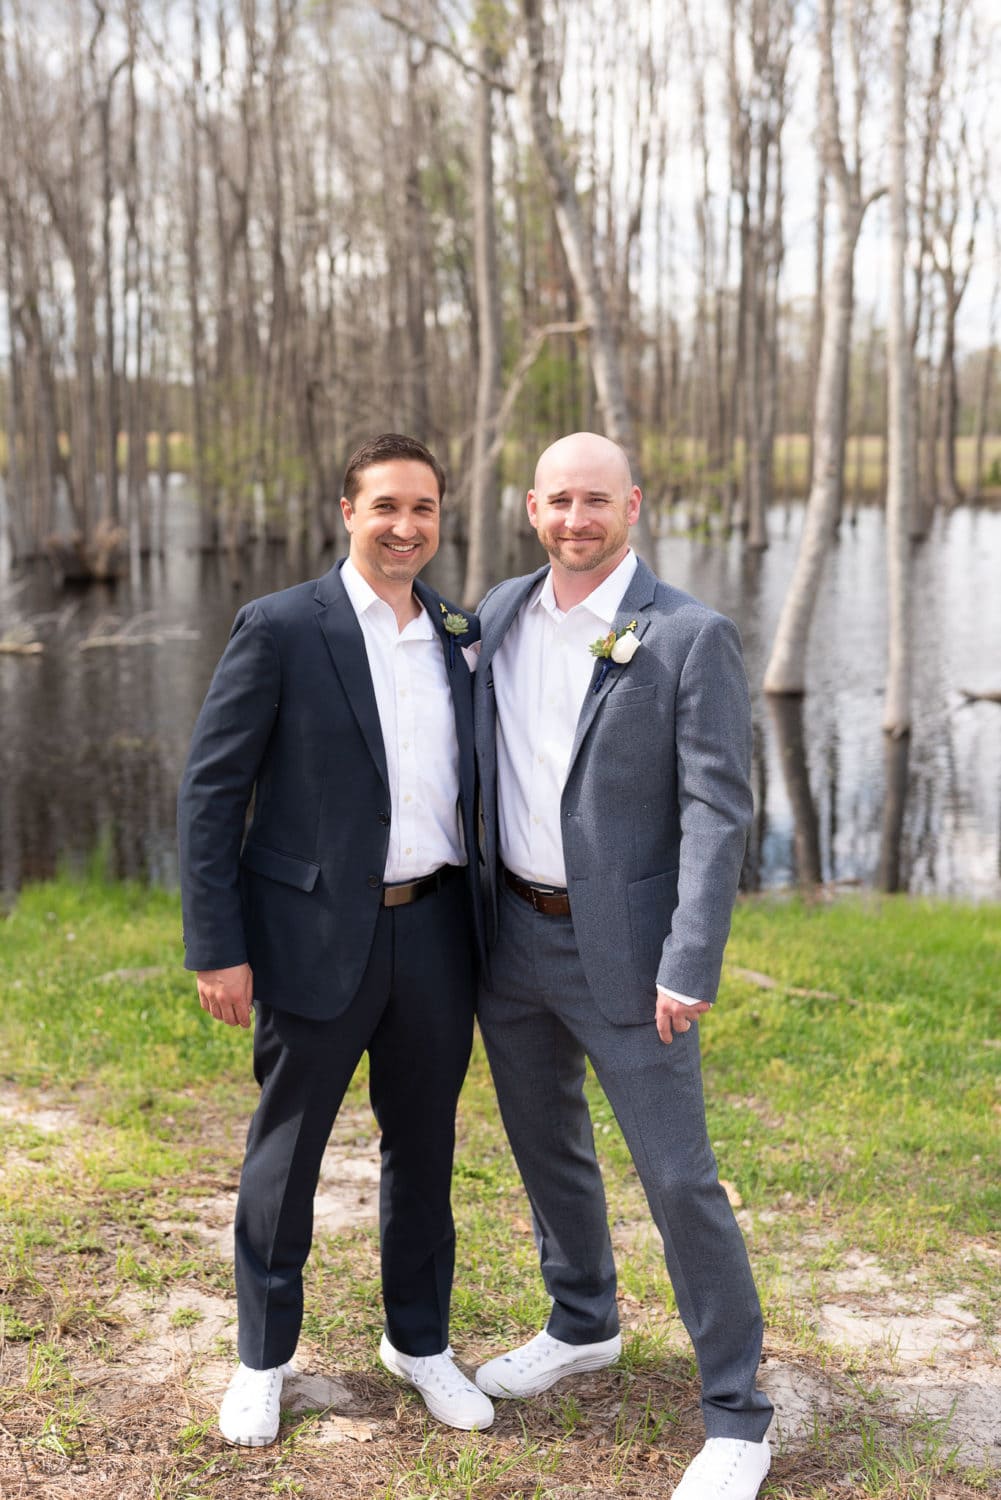 Grooms and his best man, all the other groomsmen dropped out because of social distancing - Wildhorse at Parker Farms